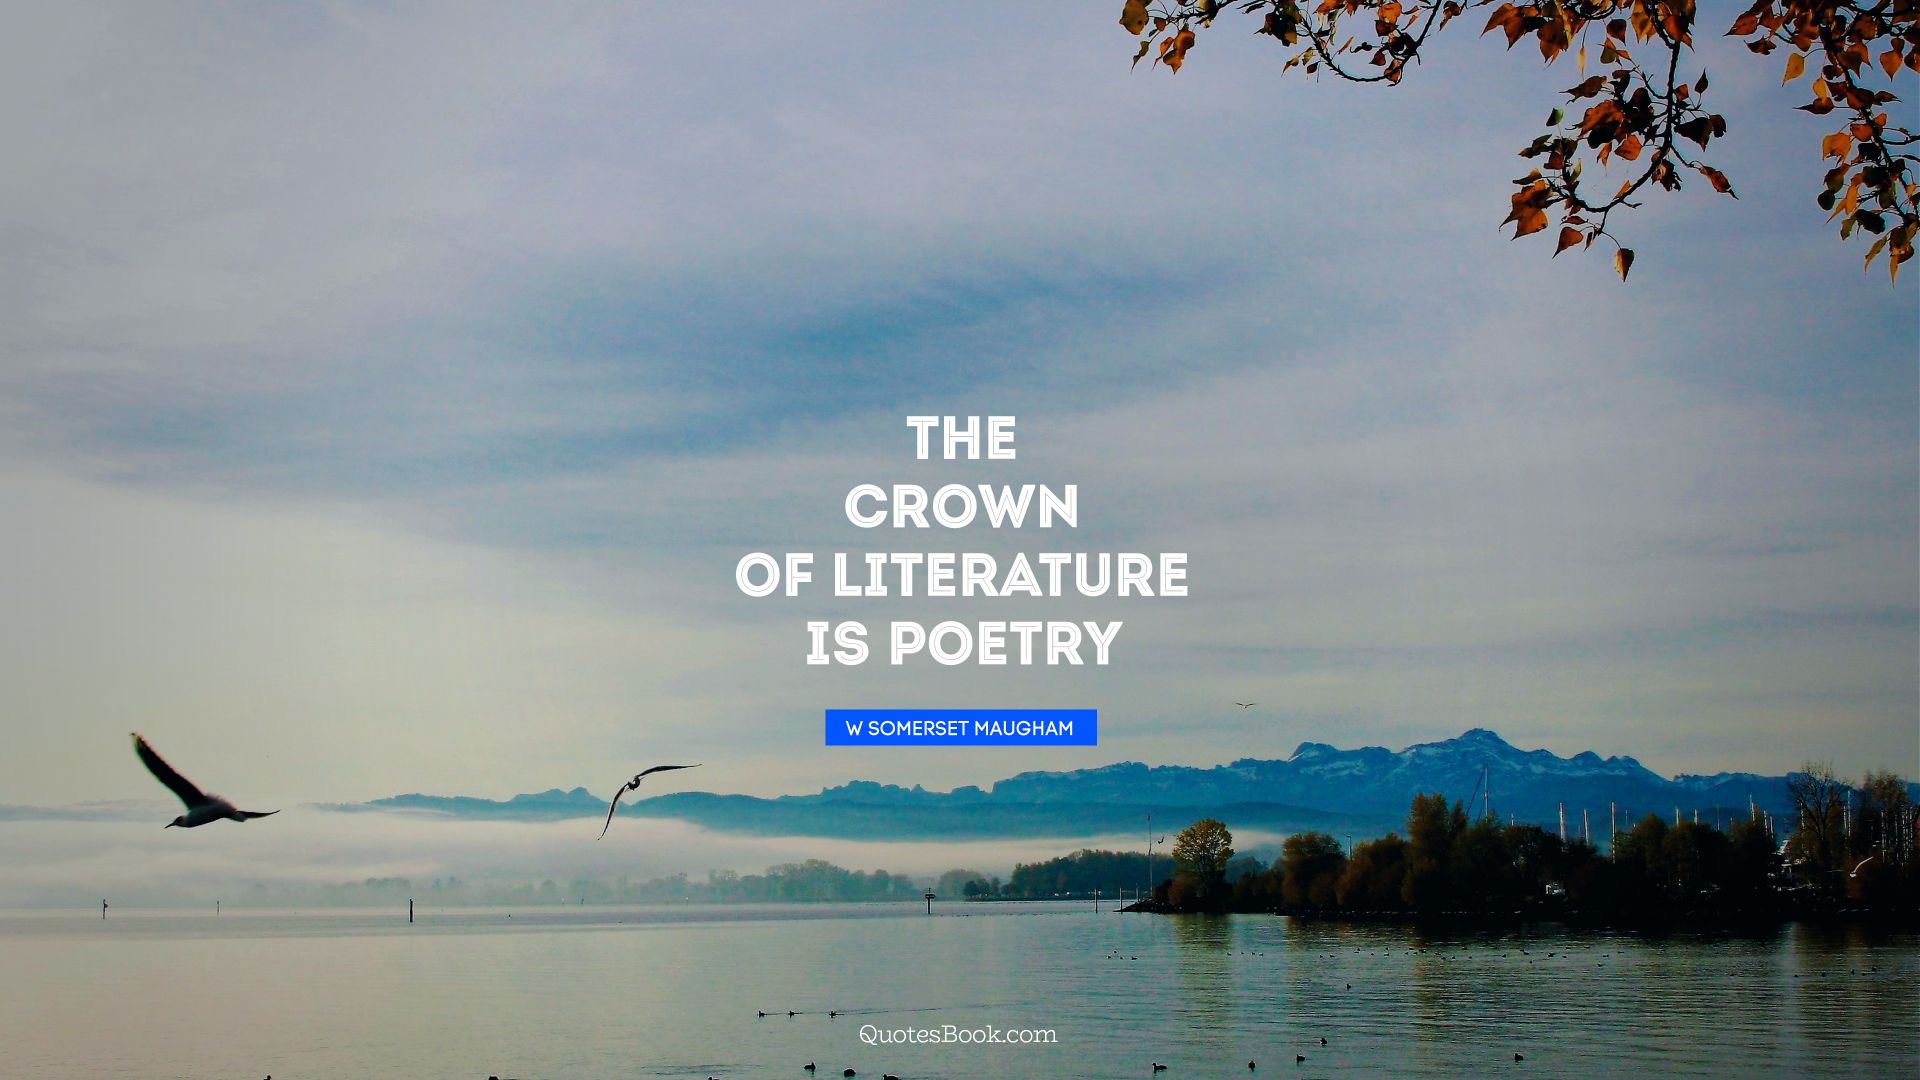 The crown of literature is poetry. - Quote by W Somerset Maugham